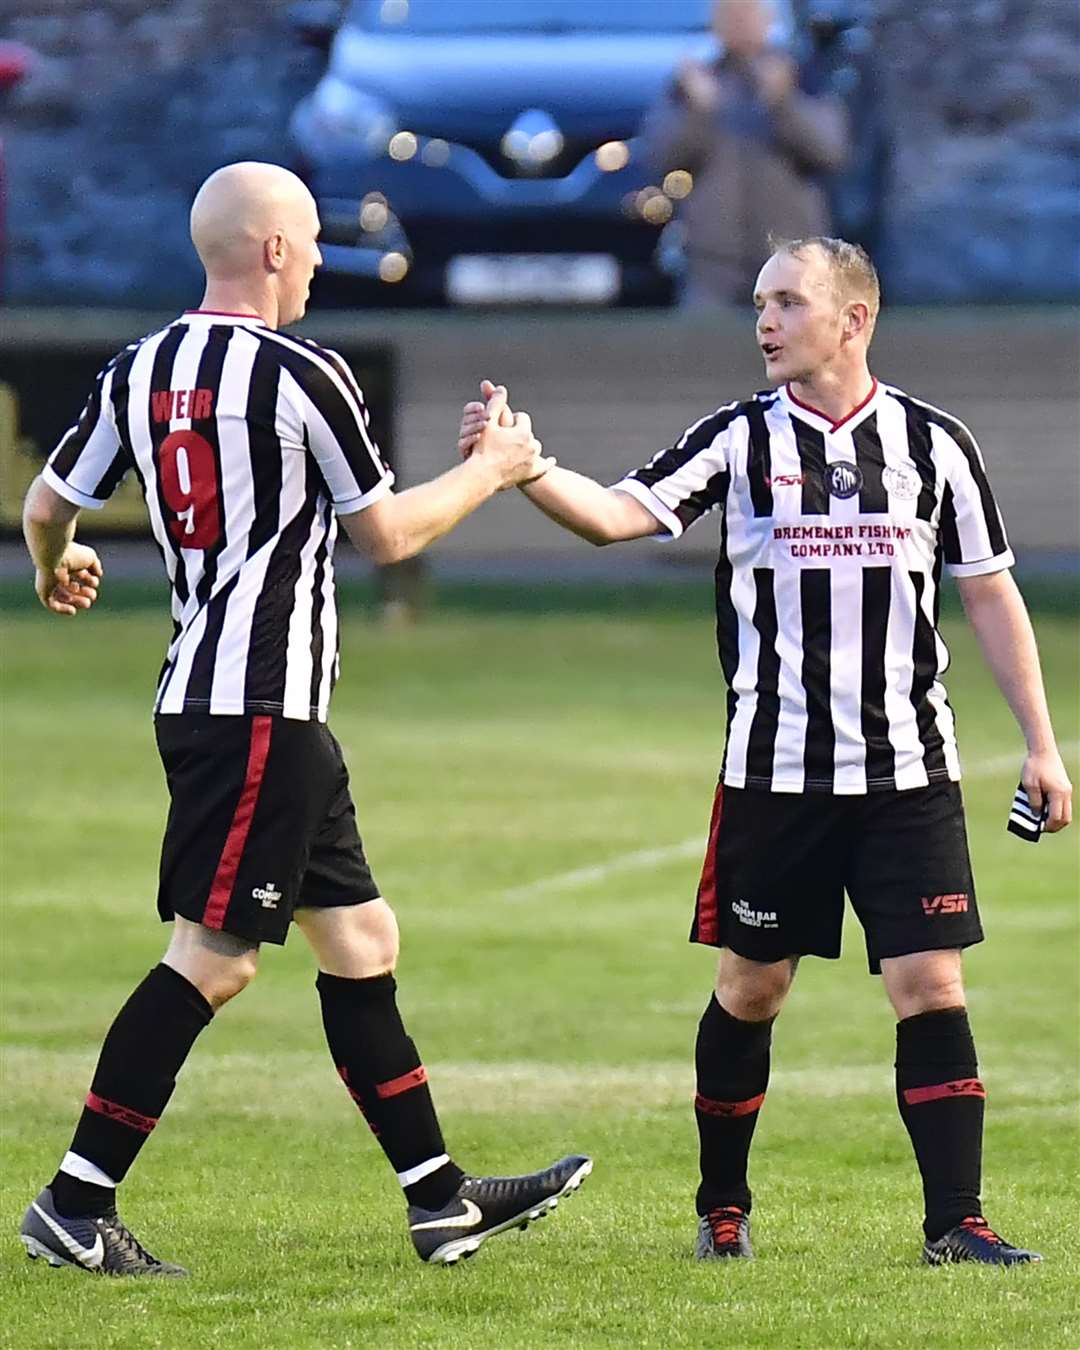 Gary Weir congratulates Richard Macadie as he leaves the pitch. Picture: Bob Roger